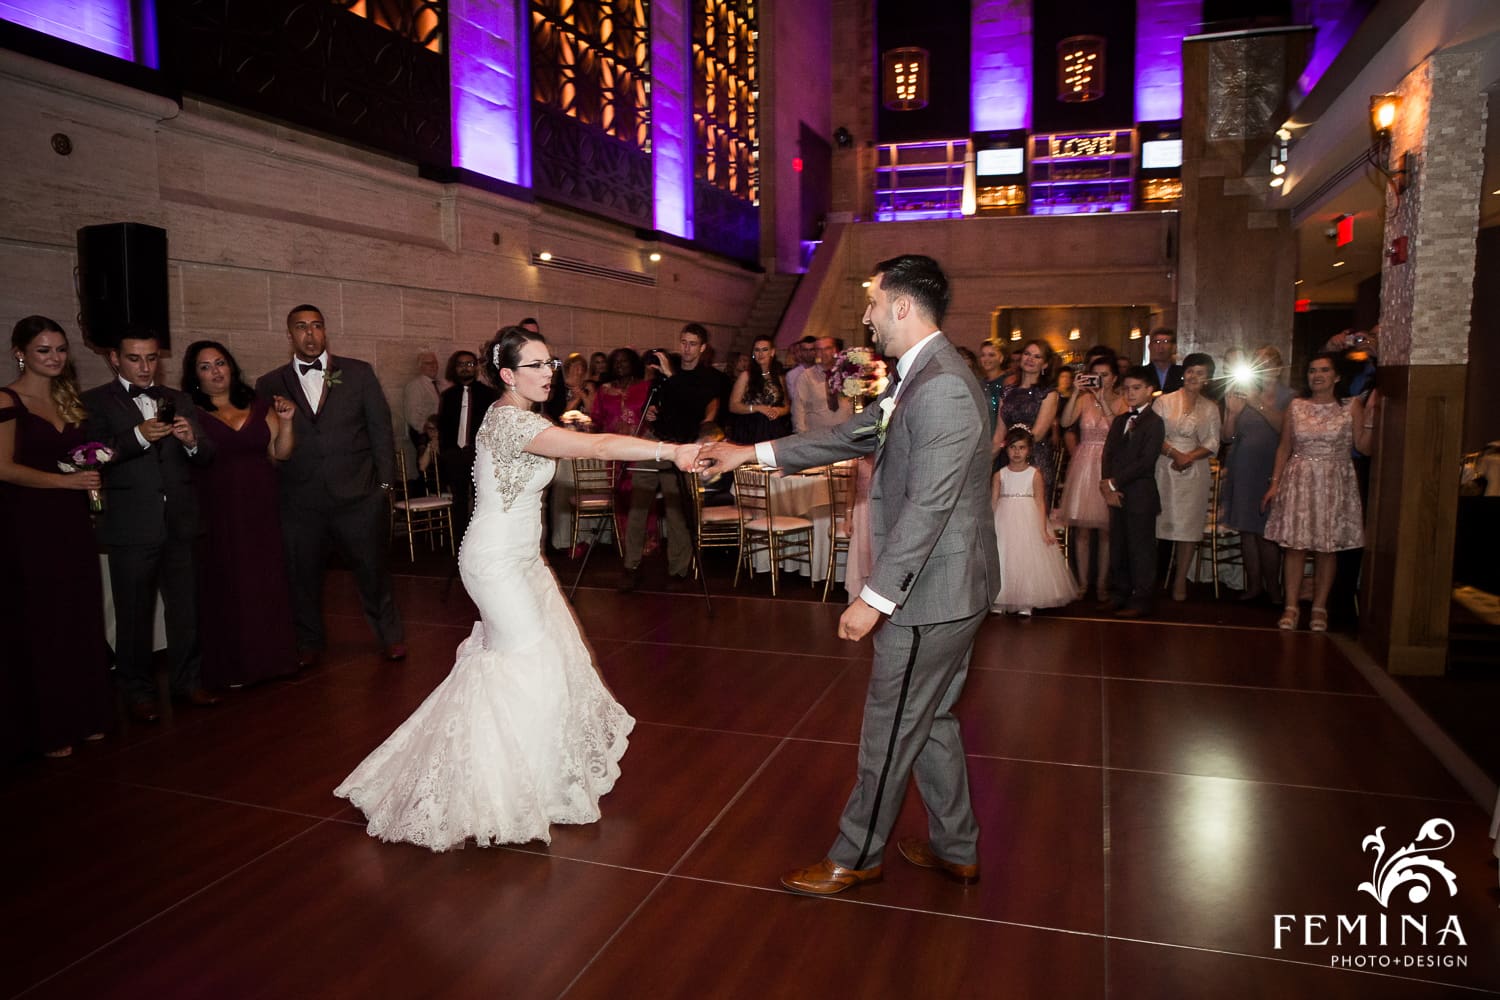 Bride and groom dancing in ballroom at Union Trust